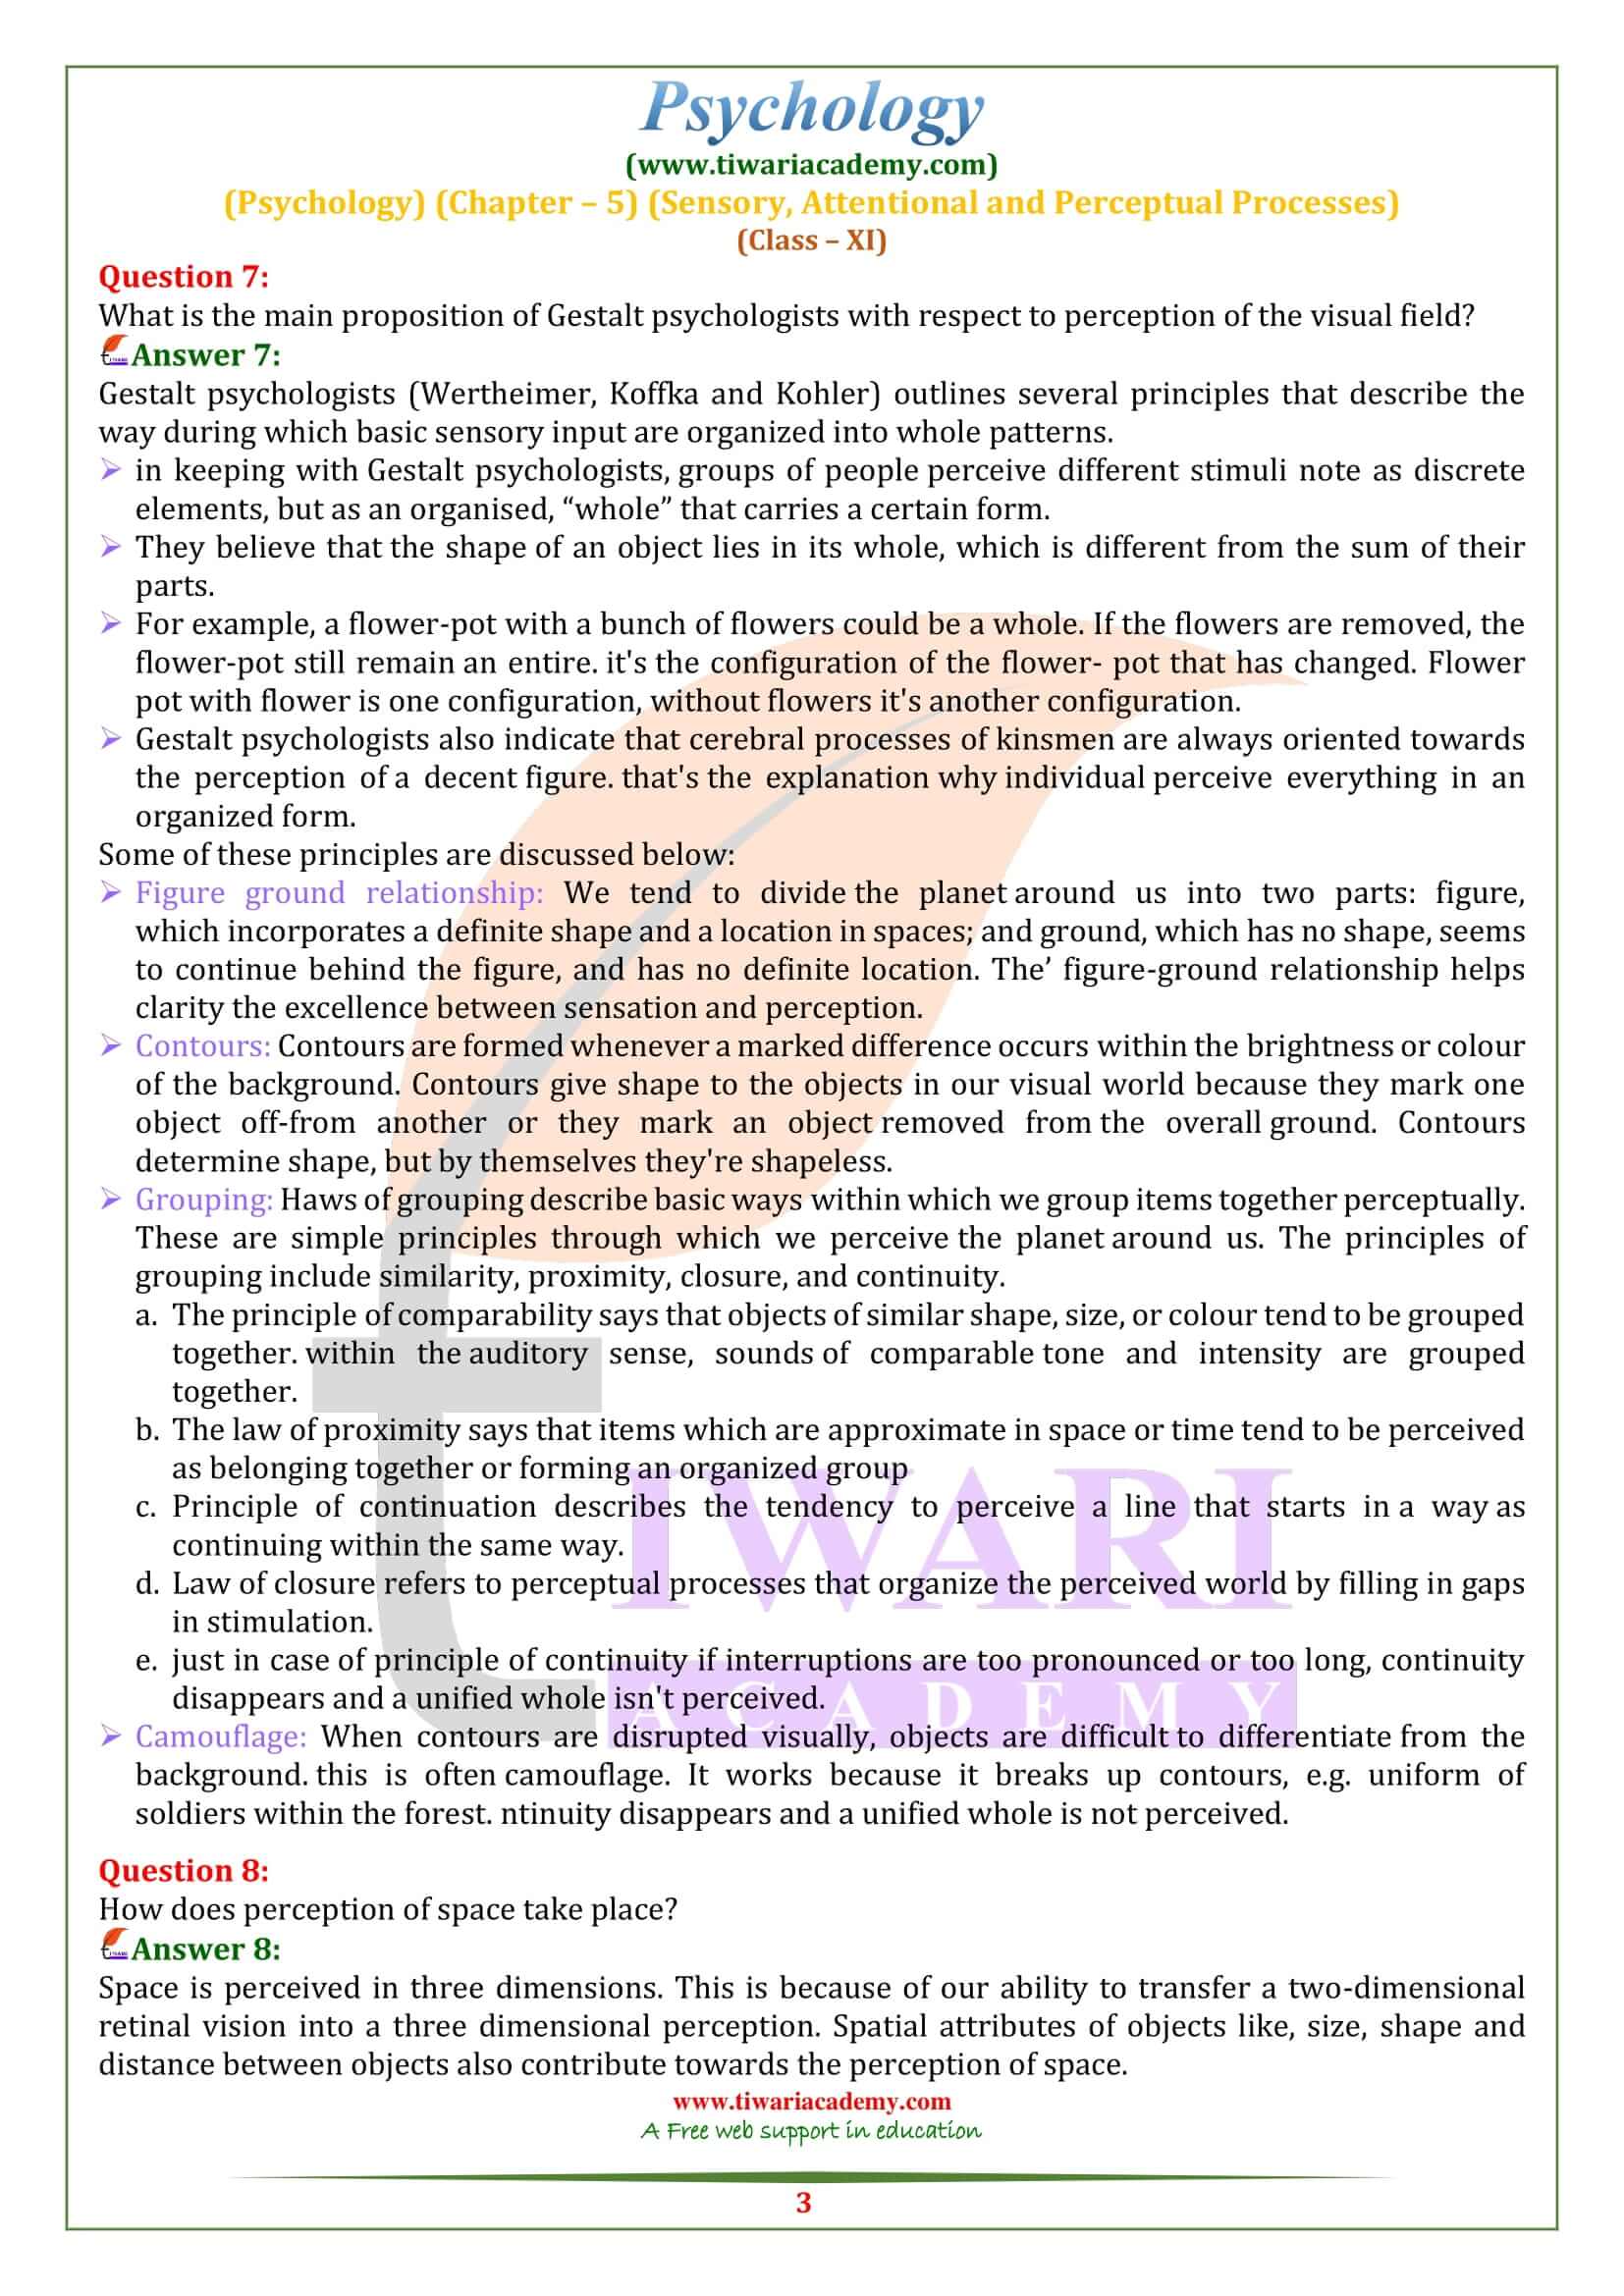 NCERT Solutions for Class 11 Psychology Chapter 5 in English Medium